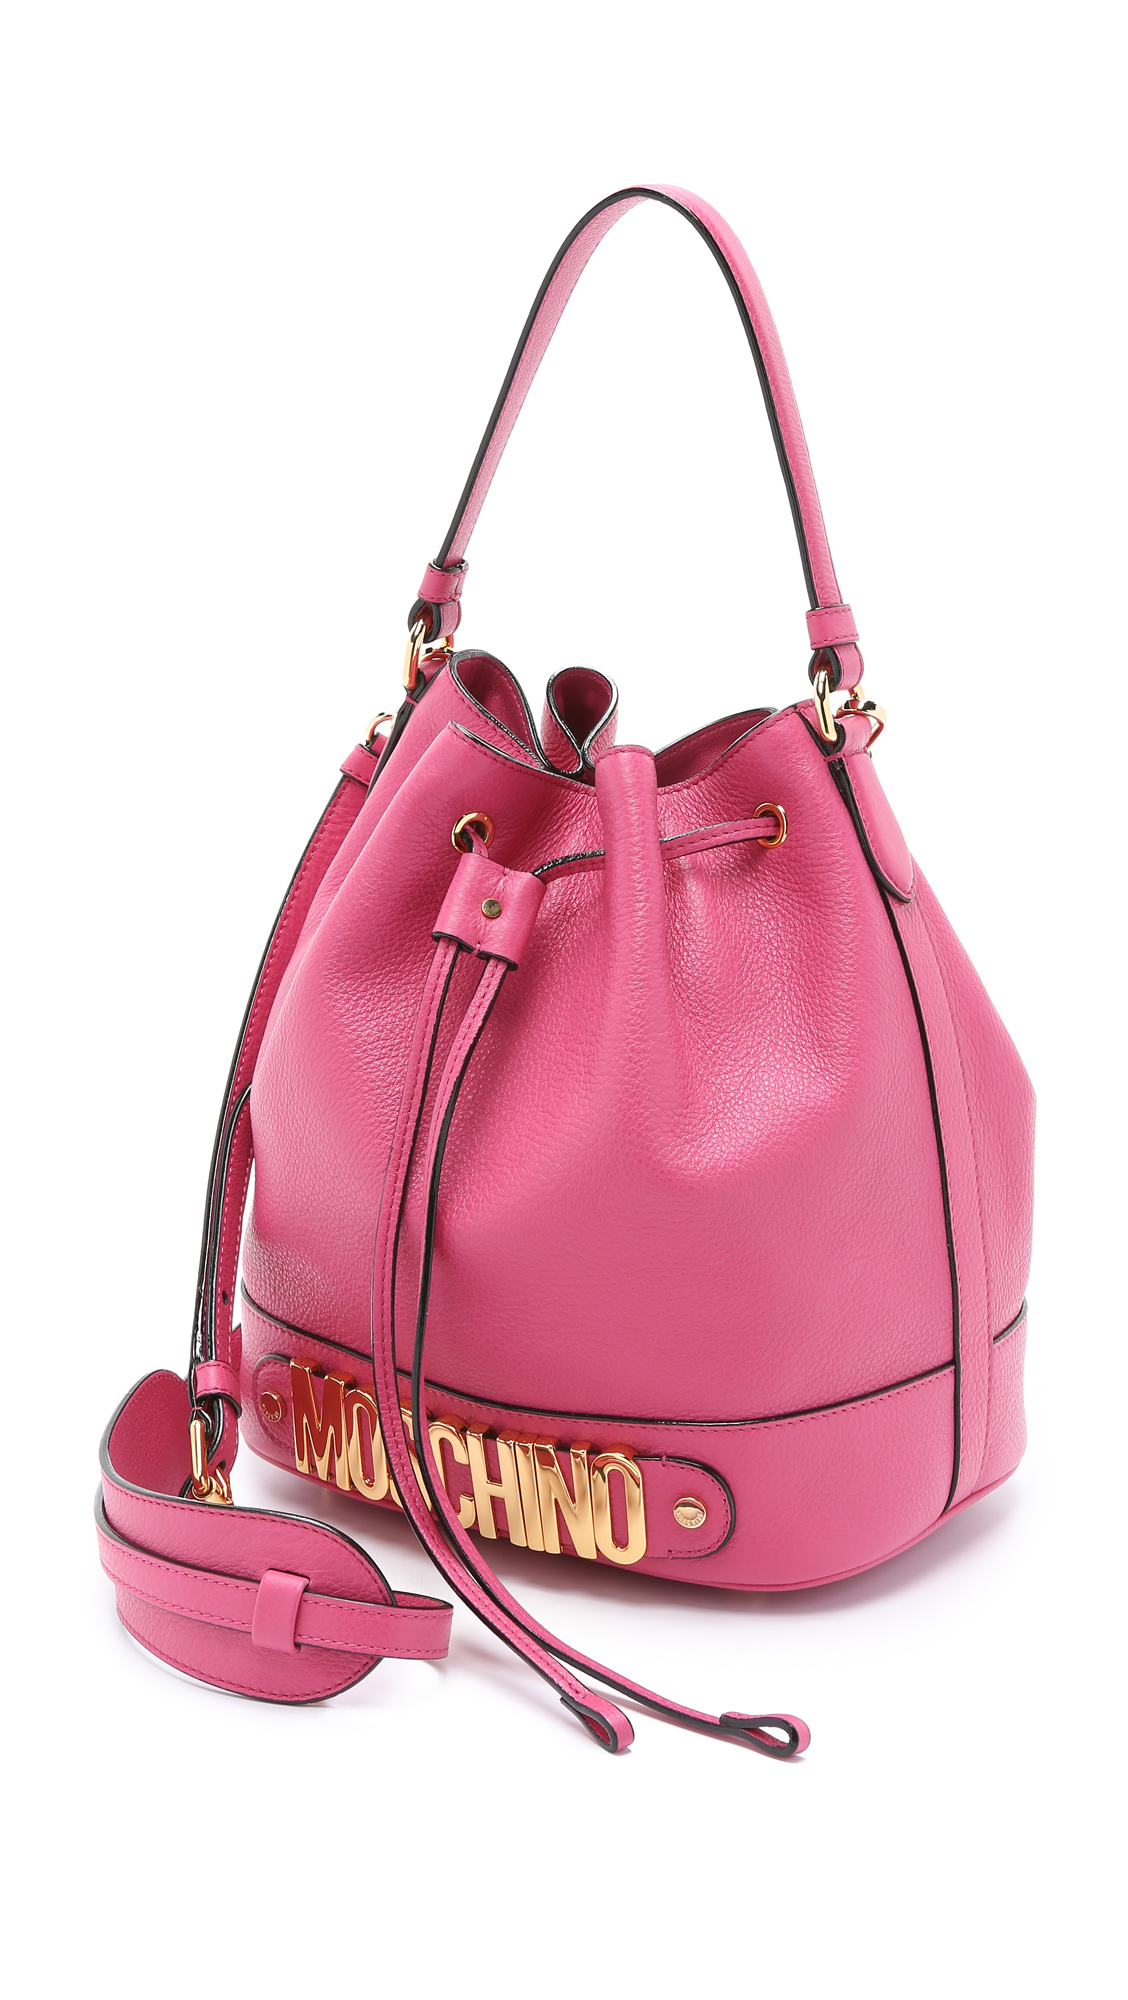 Lyst - Moschino Leather Bucket Bag - Pink in Pink